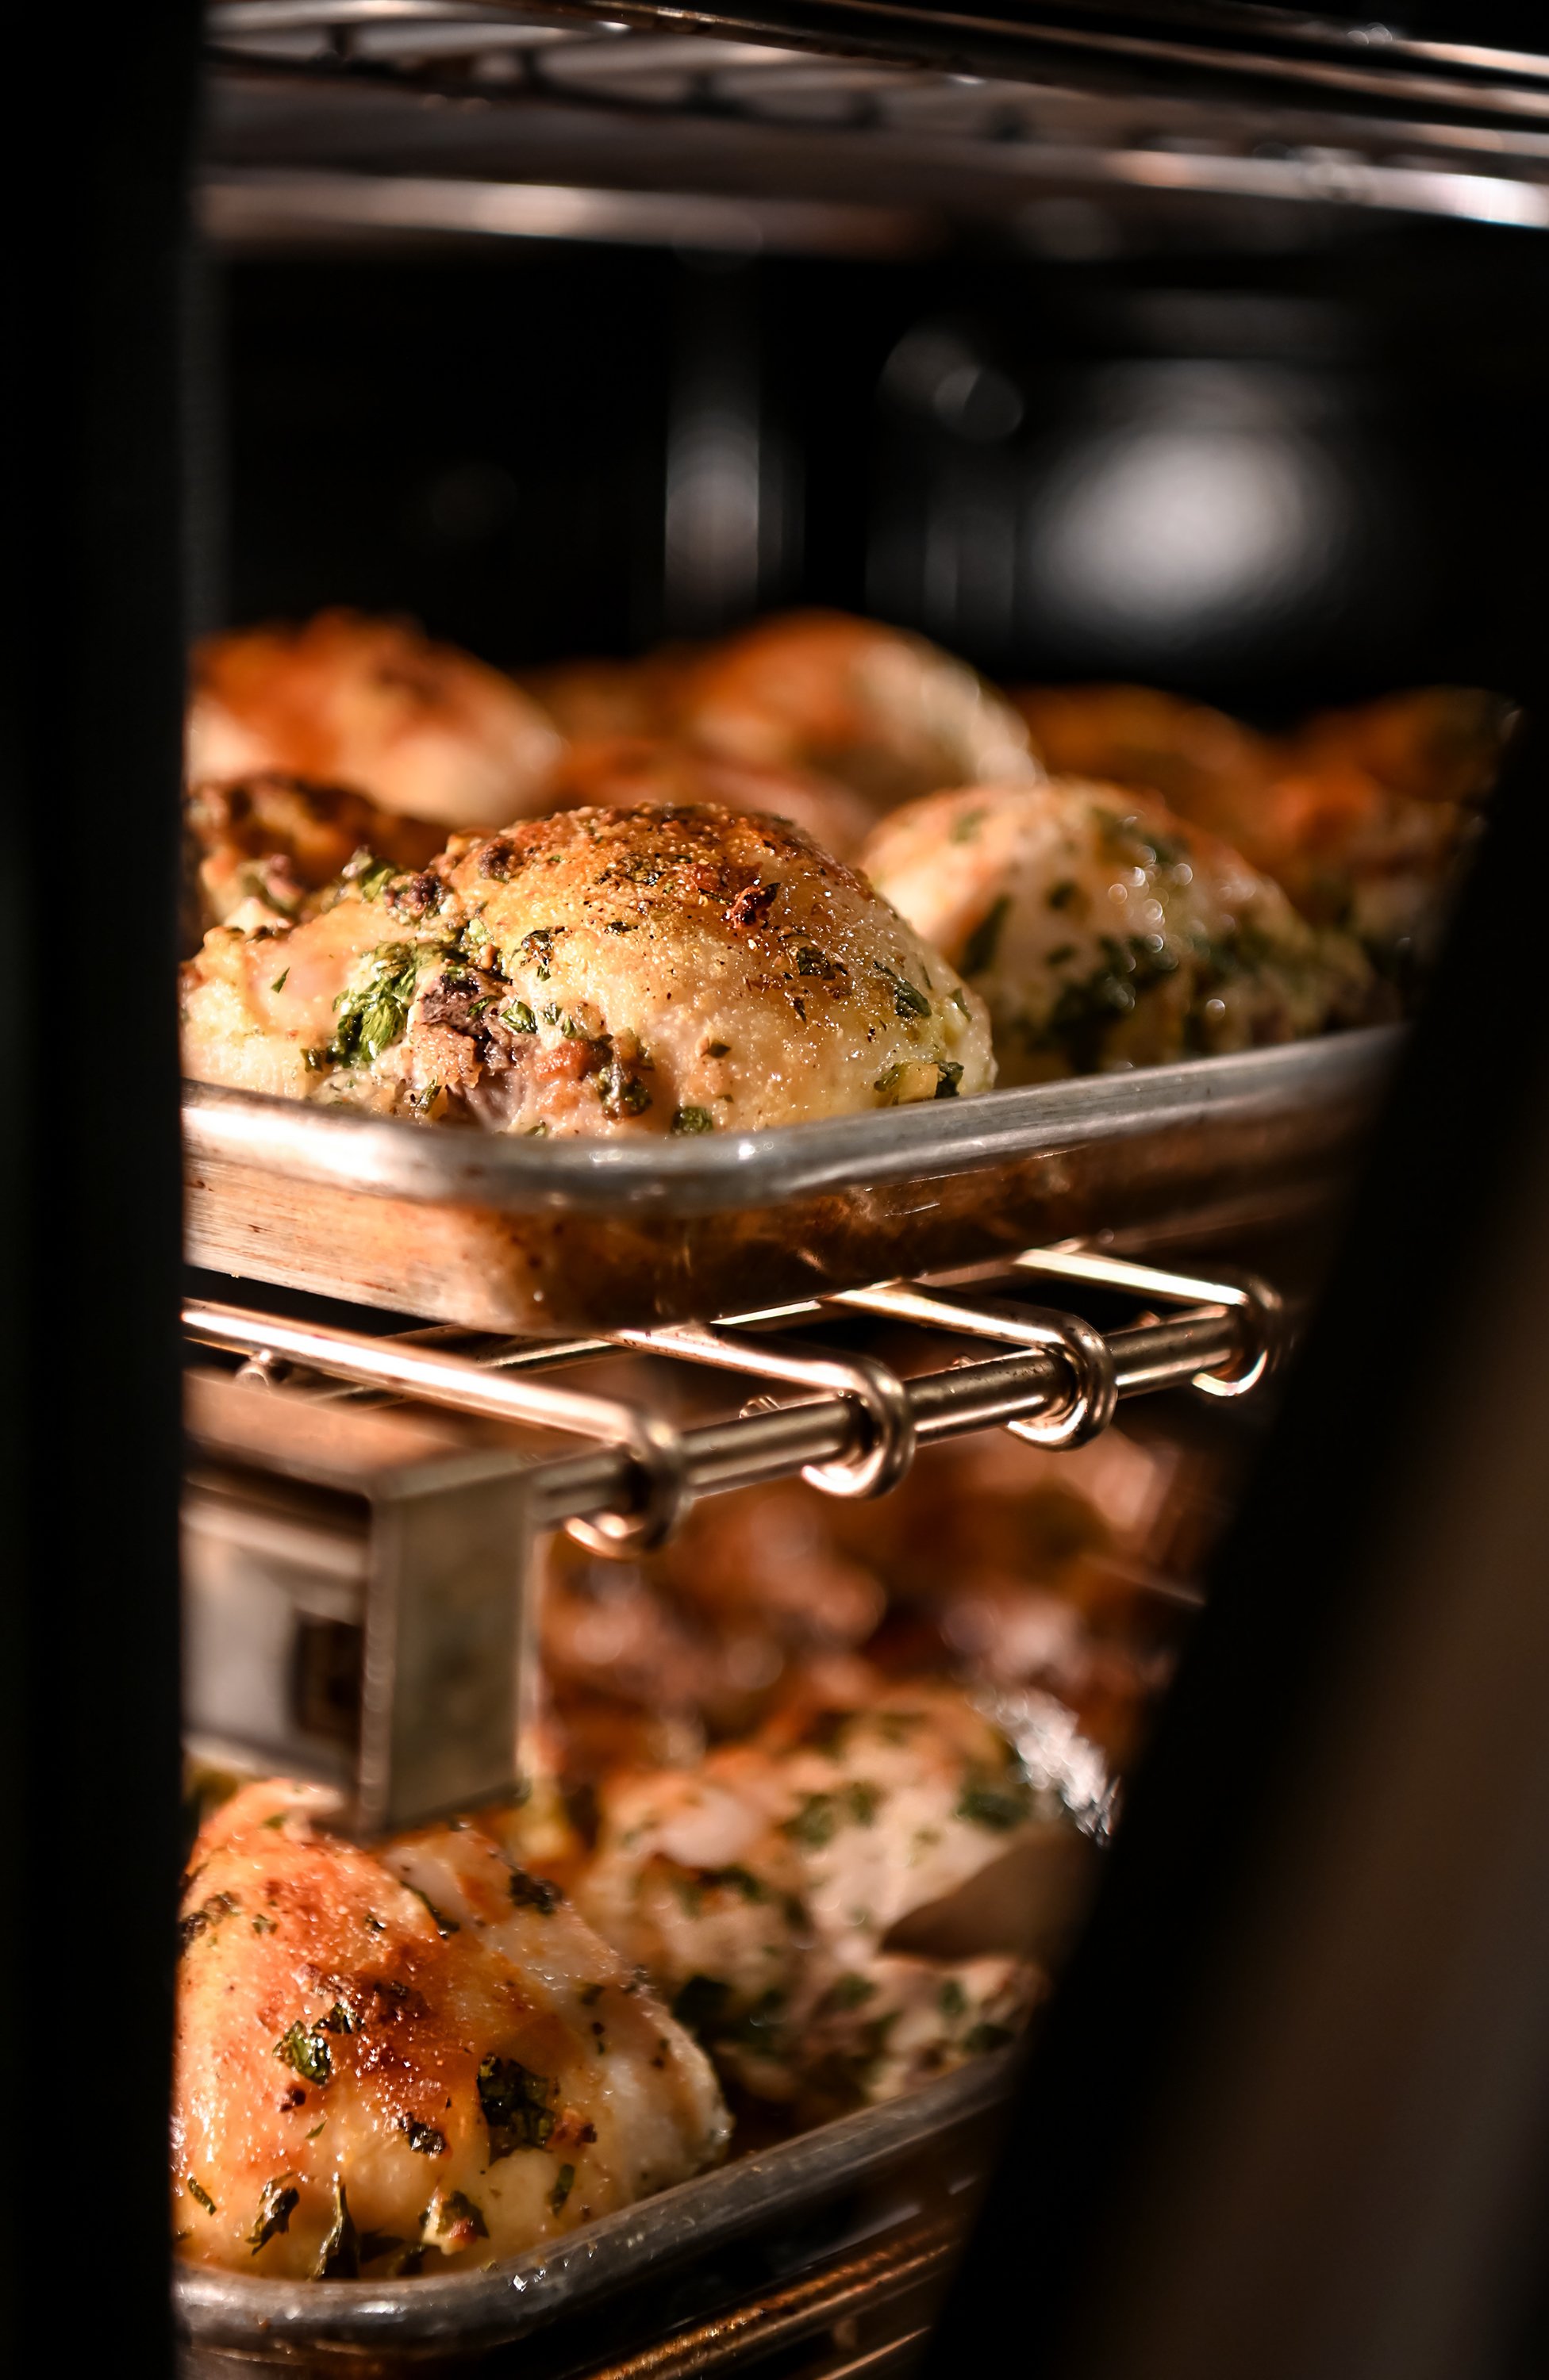 Oven Baked Chicken - photo by Andrew Werner.jpg